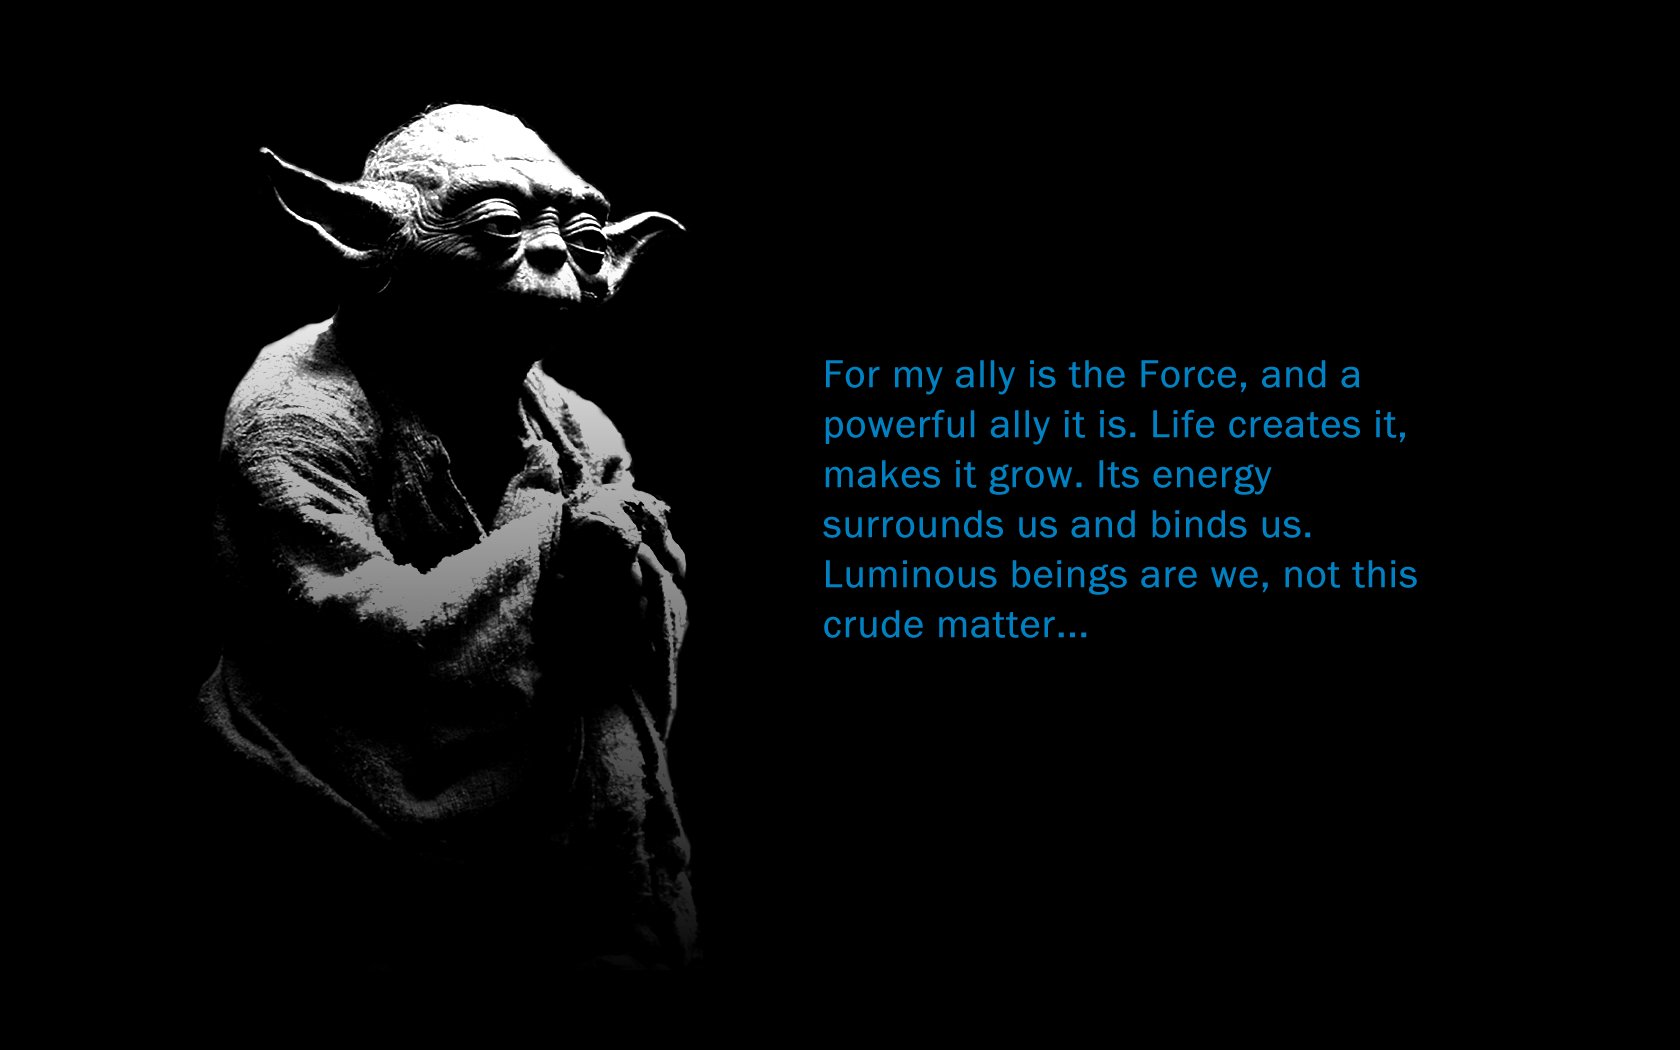 Yoda and The Force wallpaper   ForWallpapercom